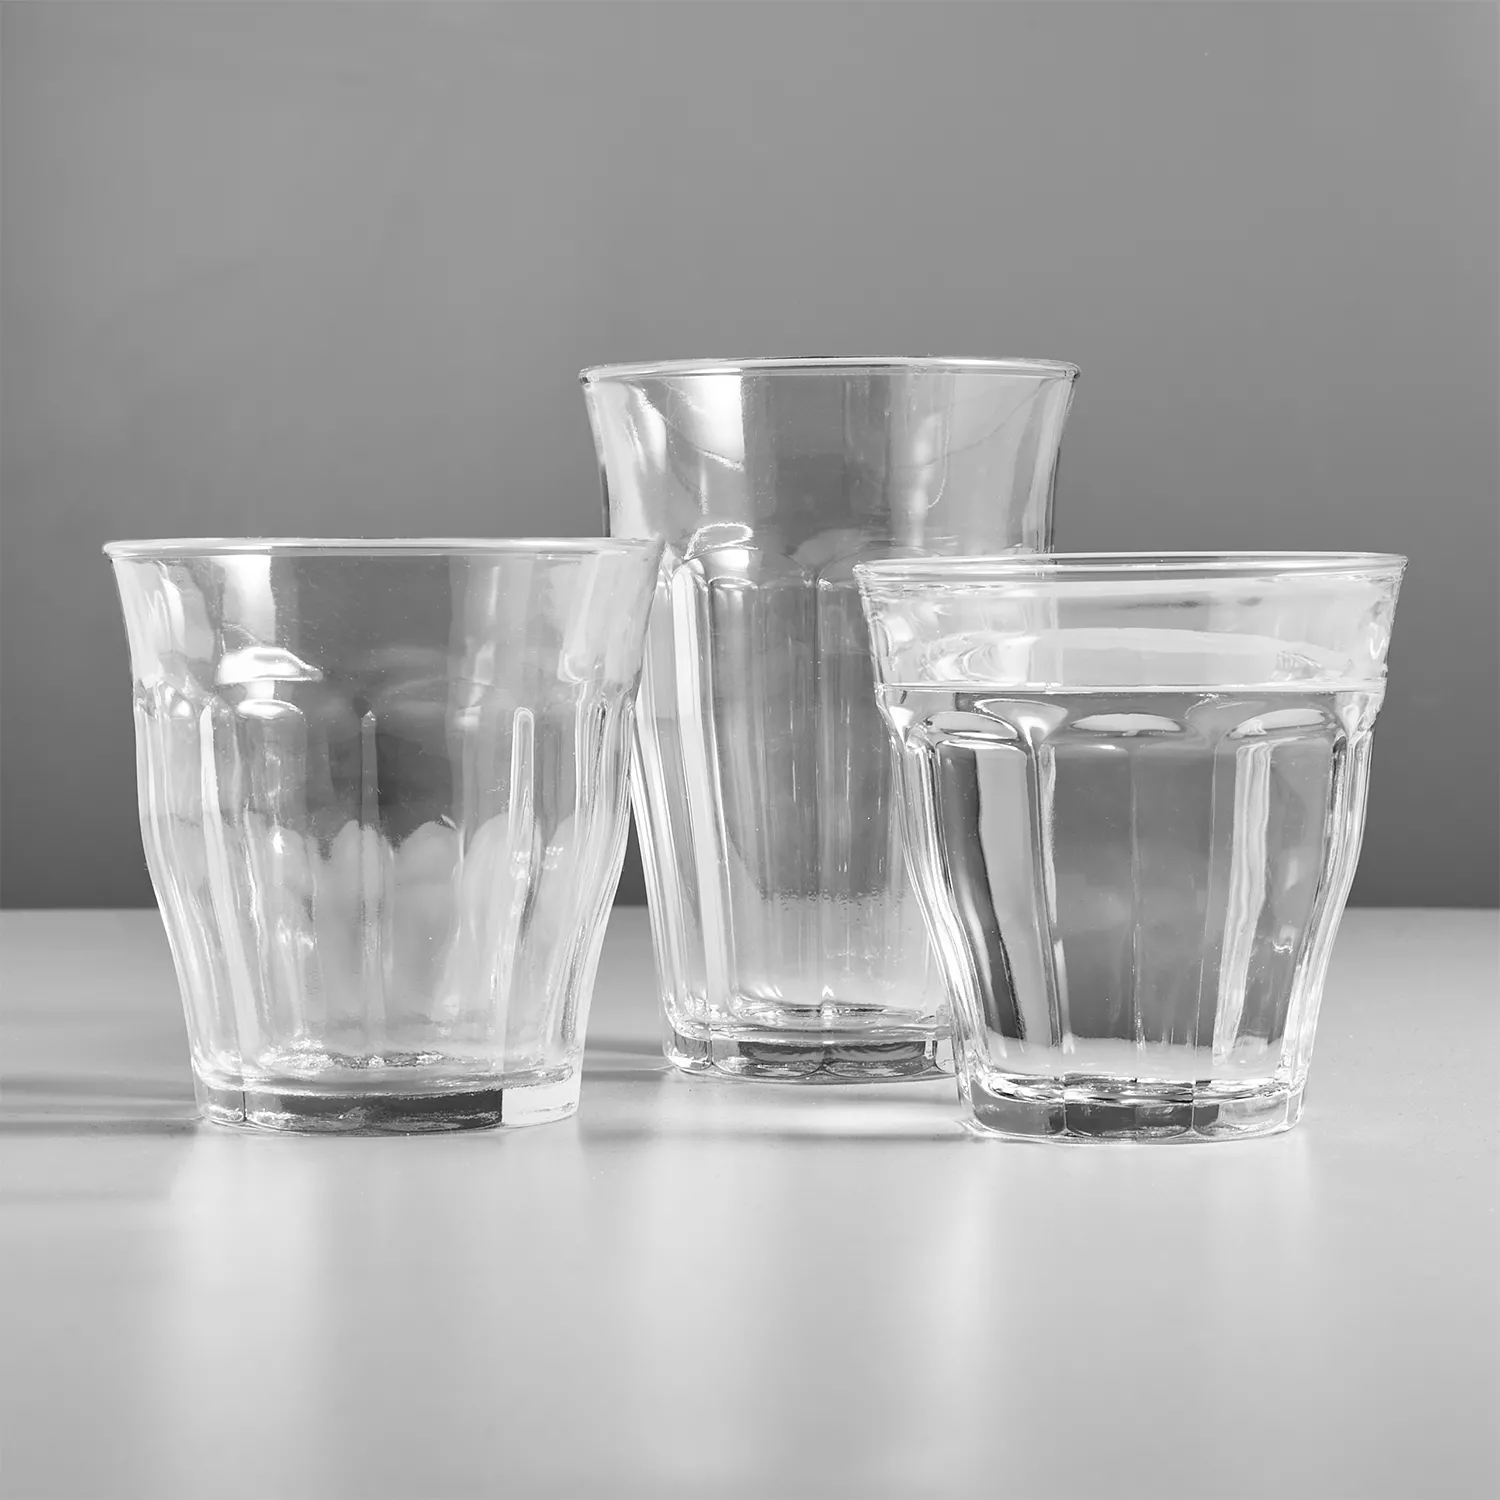 Duralex Pure 12 Ounce Pure Glass Drinkware Tumbler Drinking Glasses, Set of  6